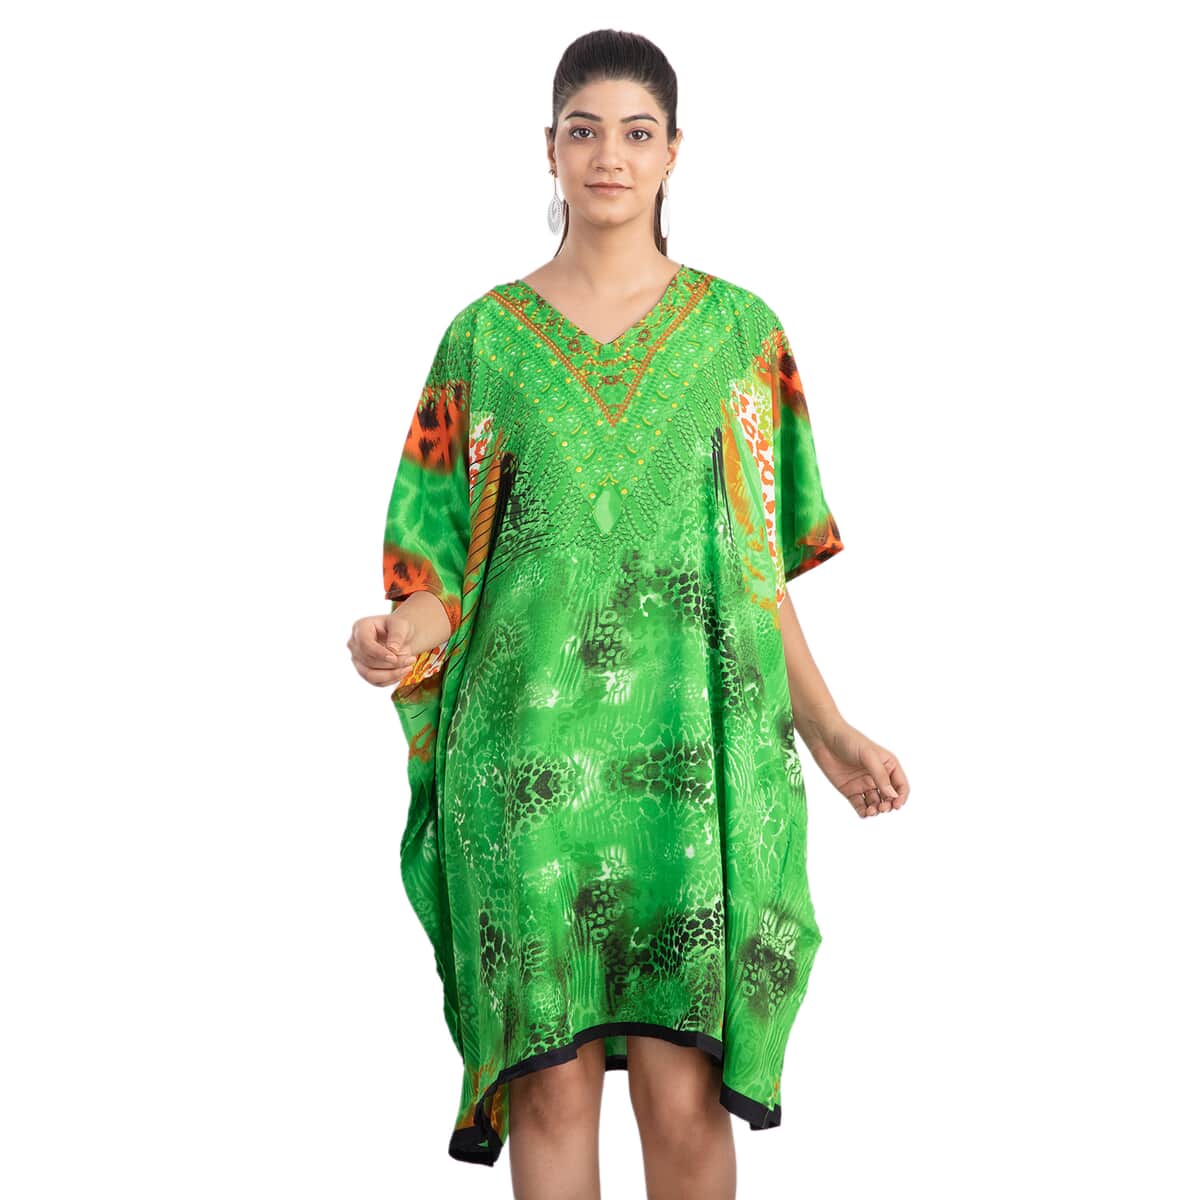 JOVIE Green Animal Fantasy Screen Printed Mid Short Kaftan with Pockets - One Size Fits Most image number 0